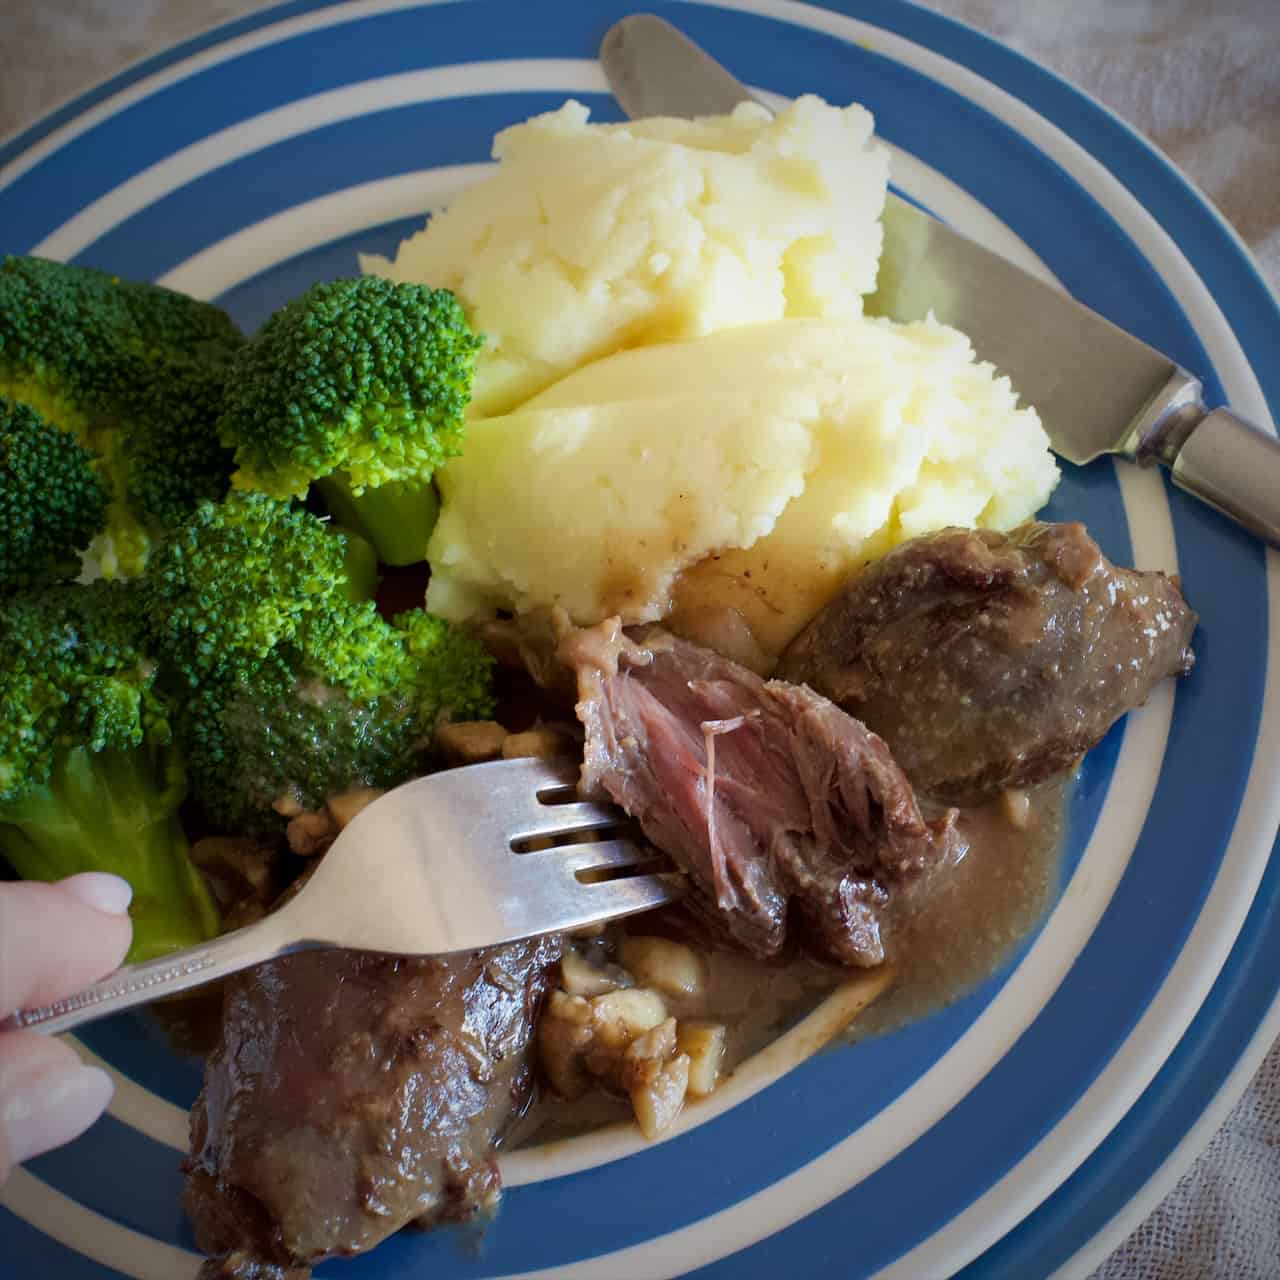 Blue and white striped dish stuffed with mashed potatoes, broccoli and tender venison cane in sauce